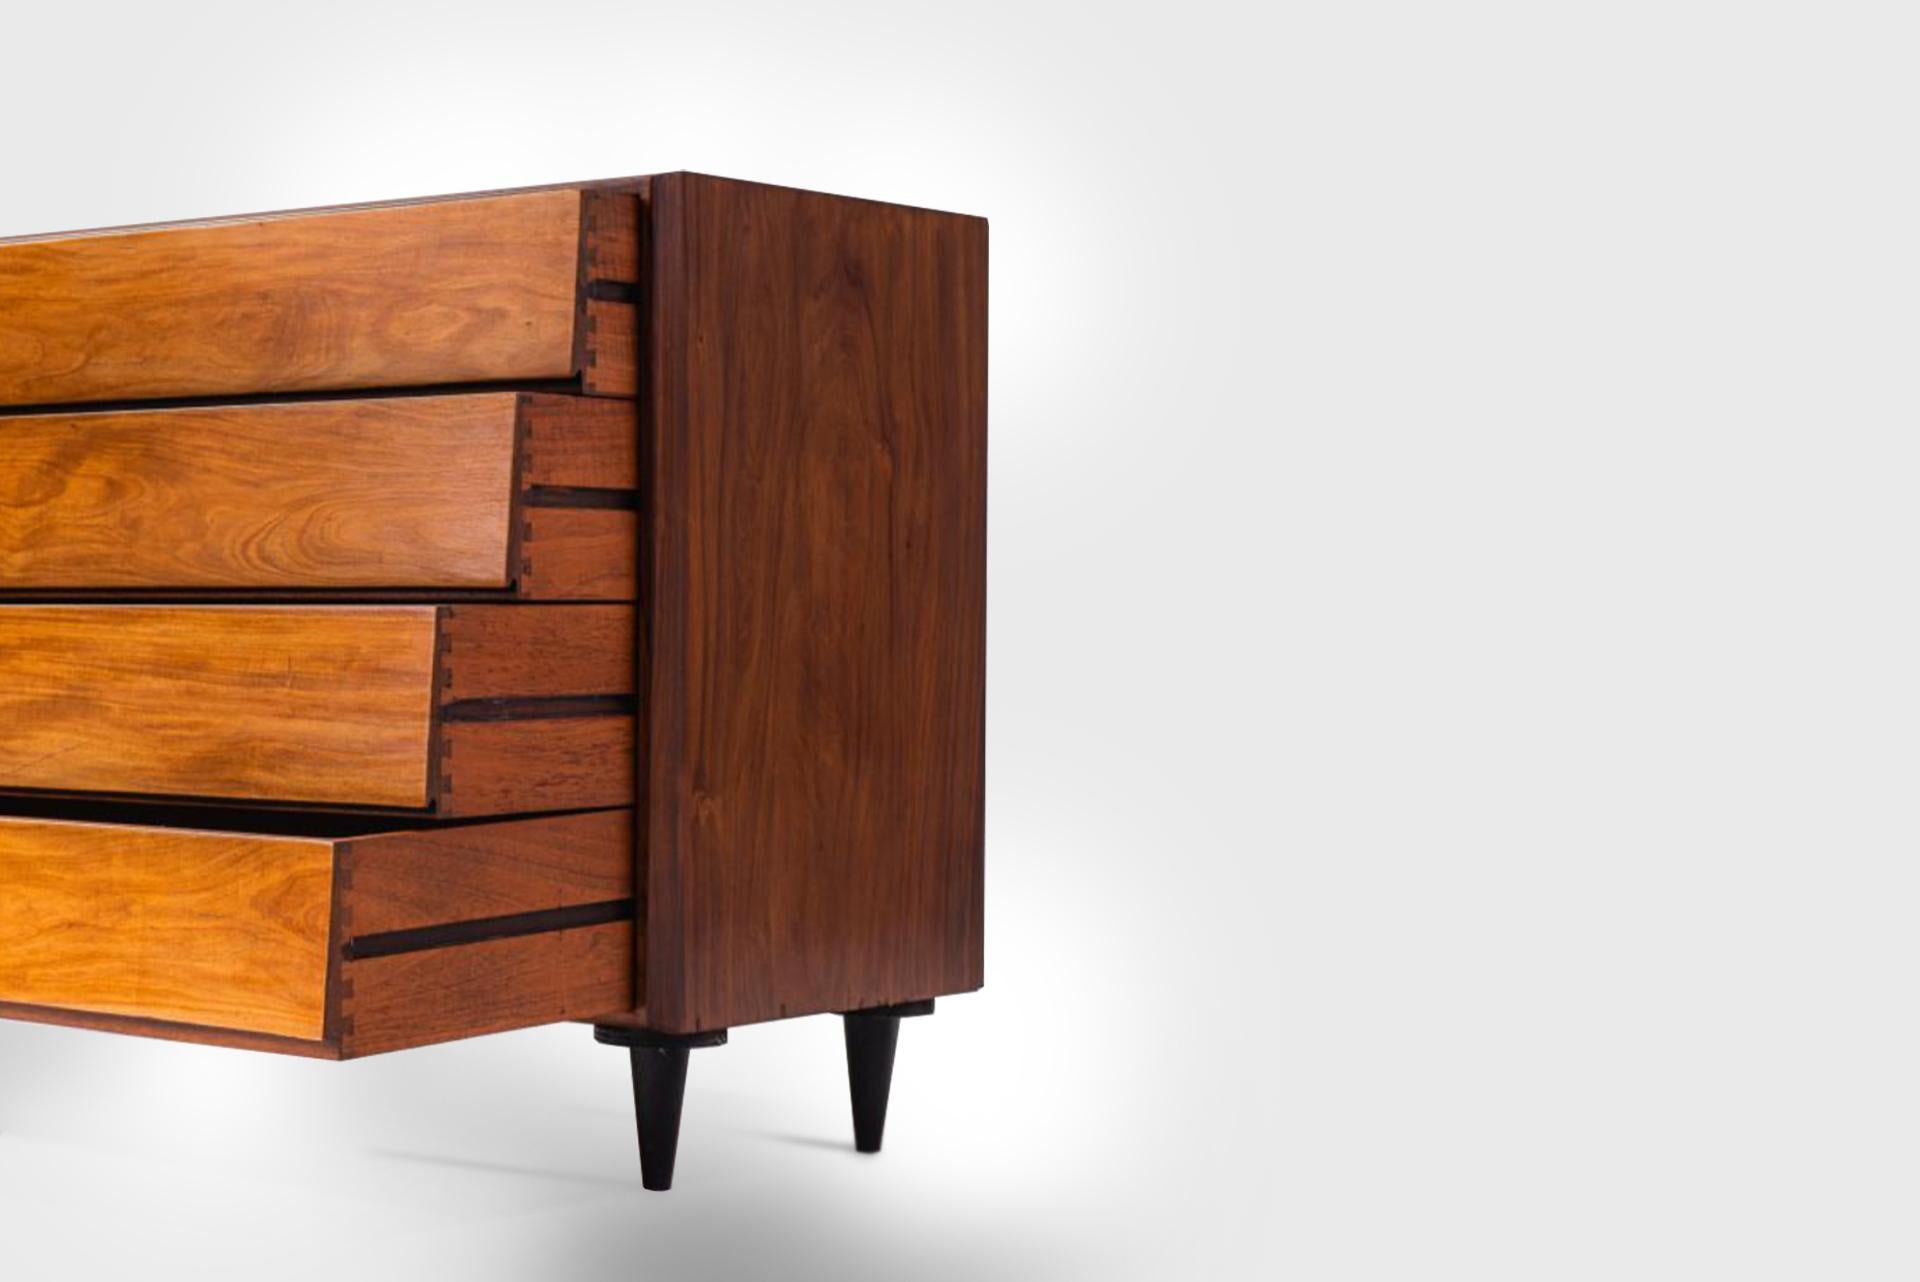 Chest of Drawers

Manufactured by Forma
Brazil, 1955
Solid and laminated caviuna with handles embedded
Measurements
125 x 45 x 78,5h cm
49,2 x 18 x 30,9h in